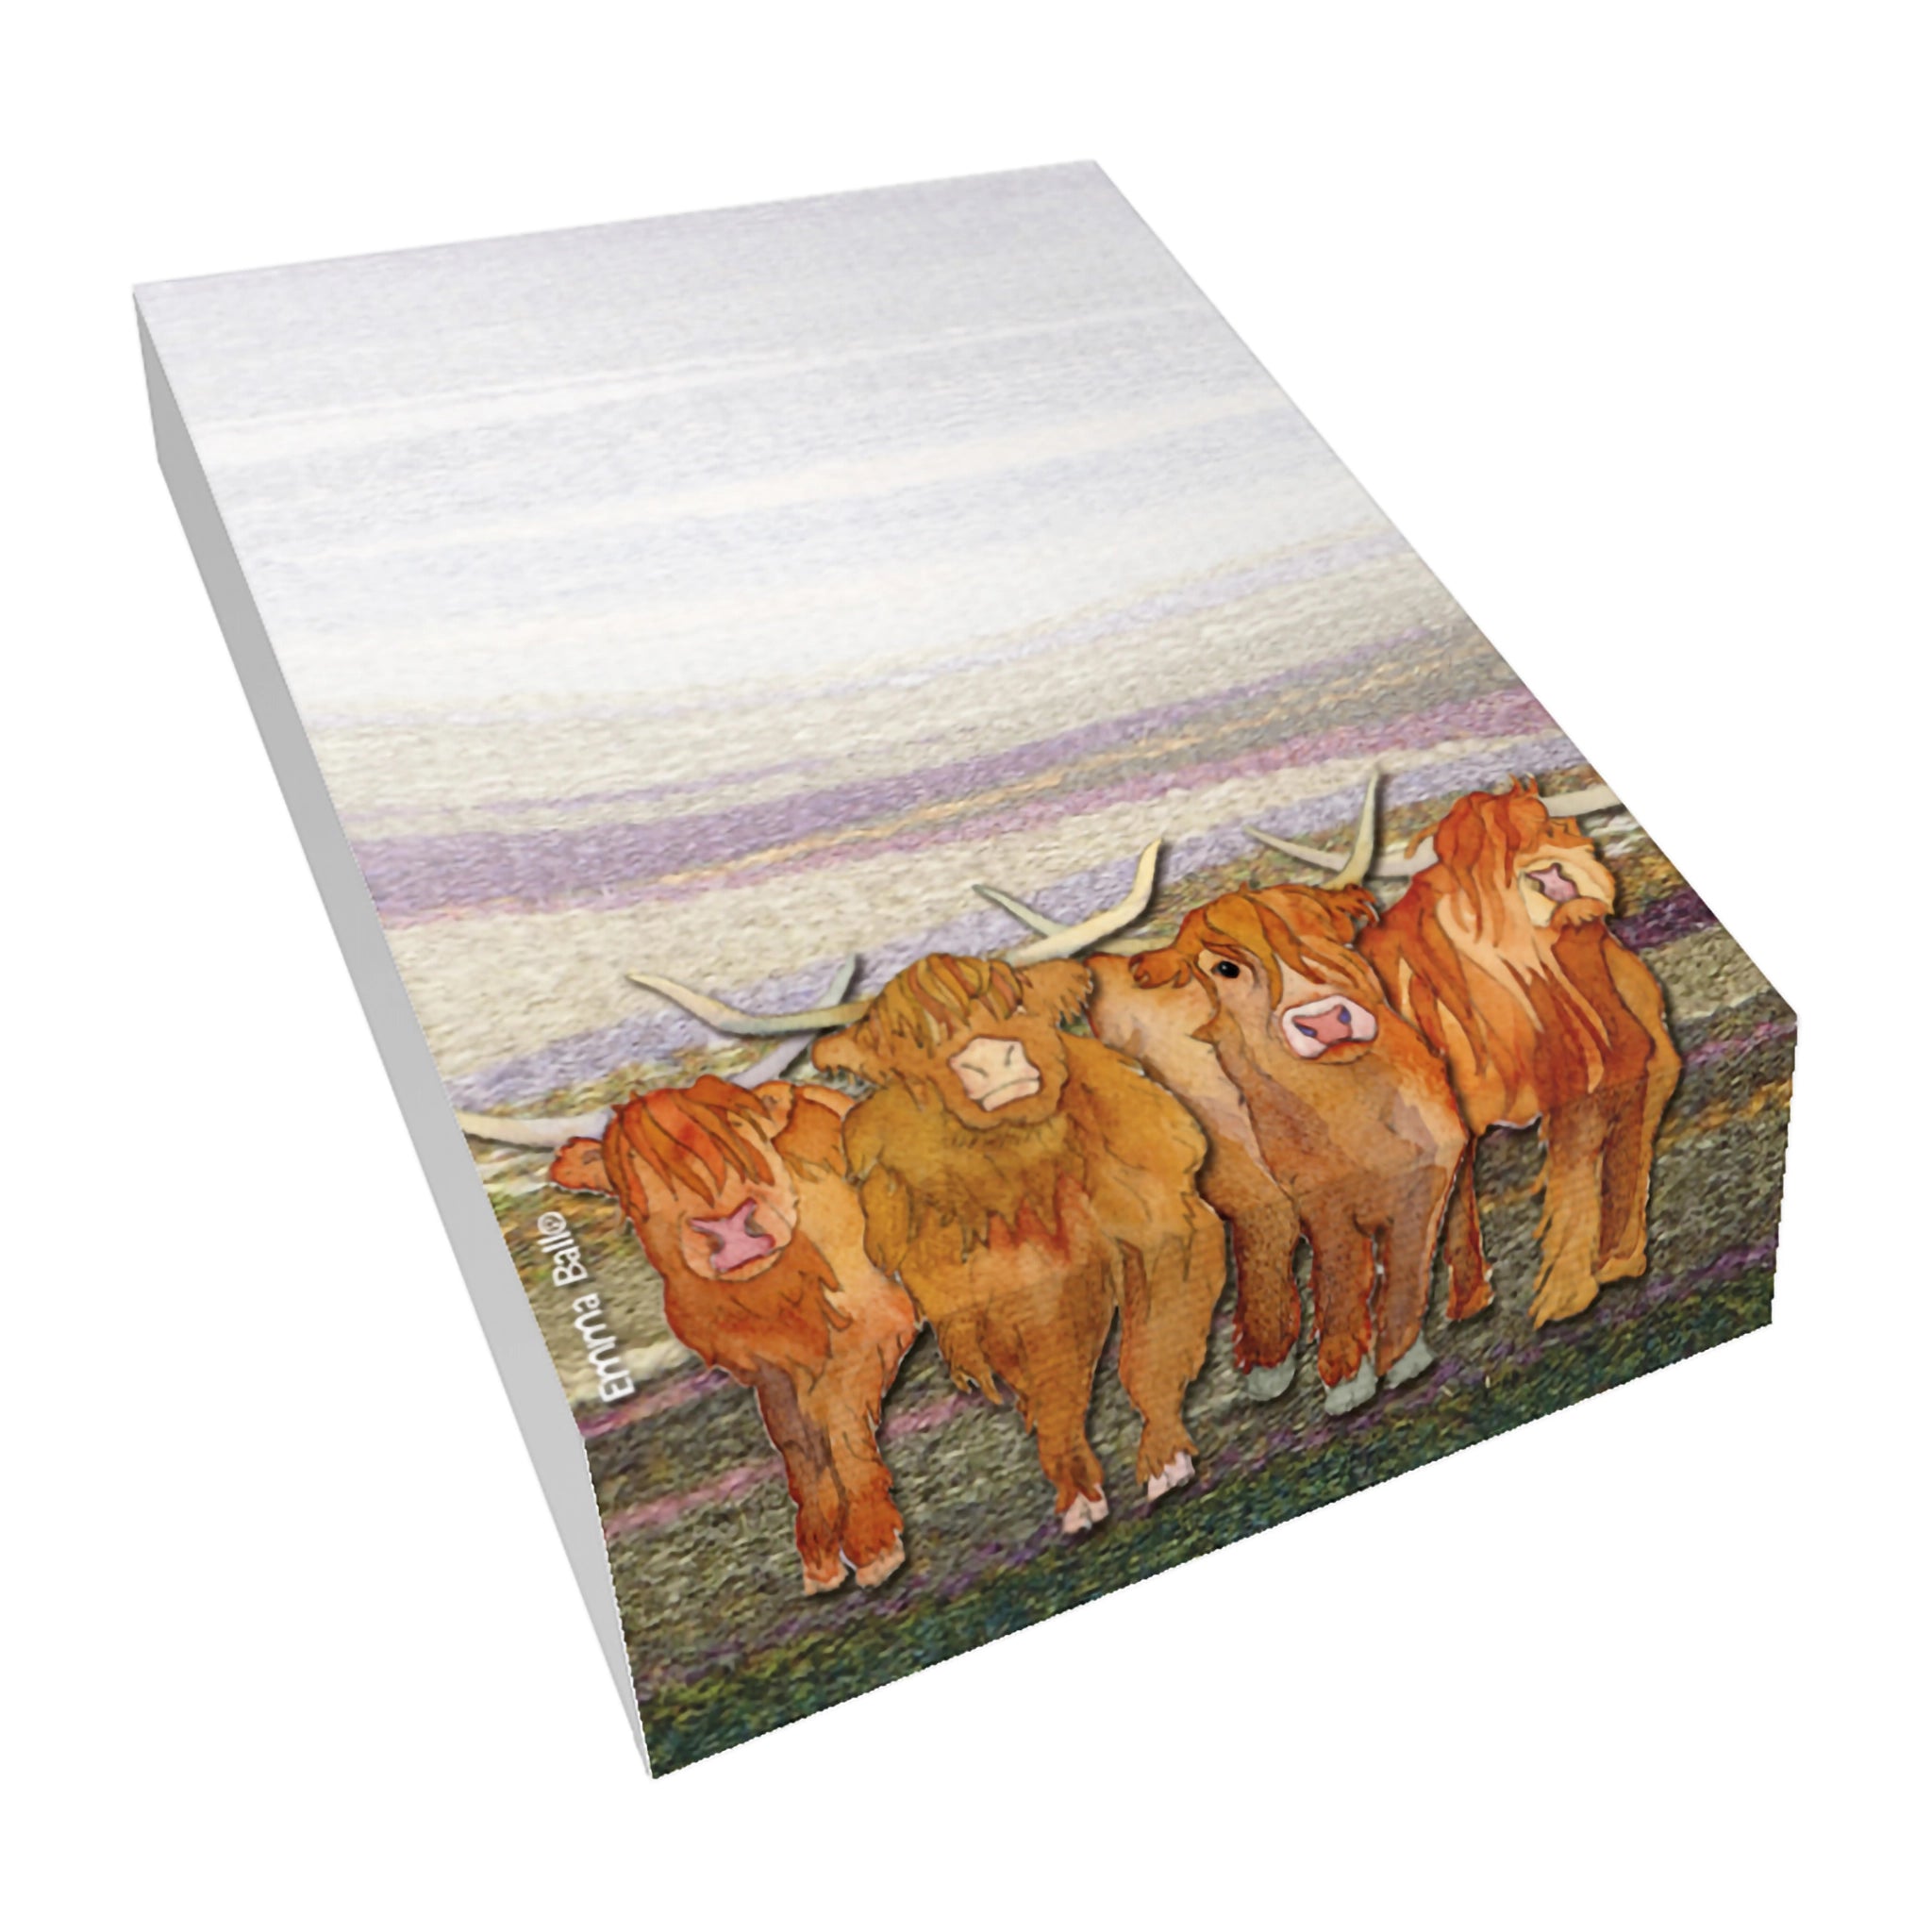 A tick slanted pad block notepad with a printed illustration of Highland cows